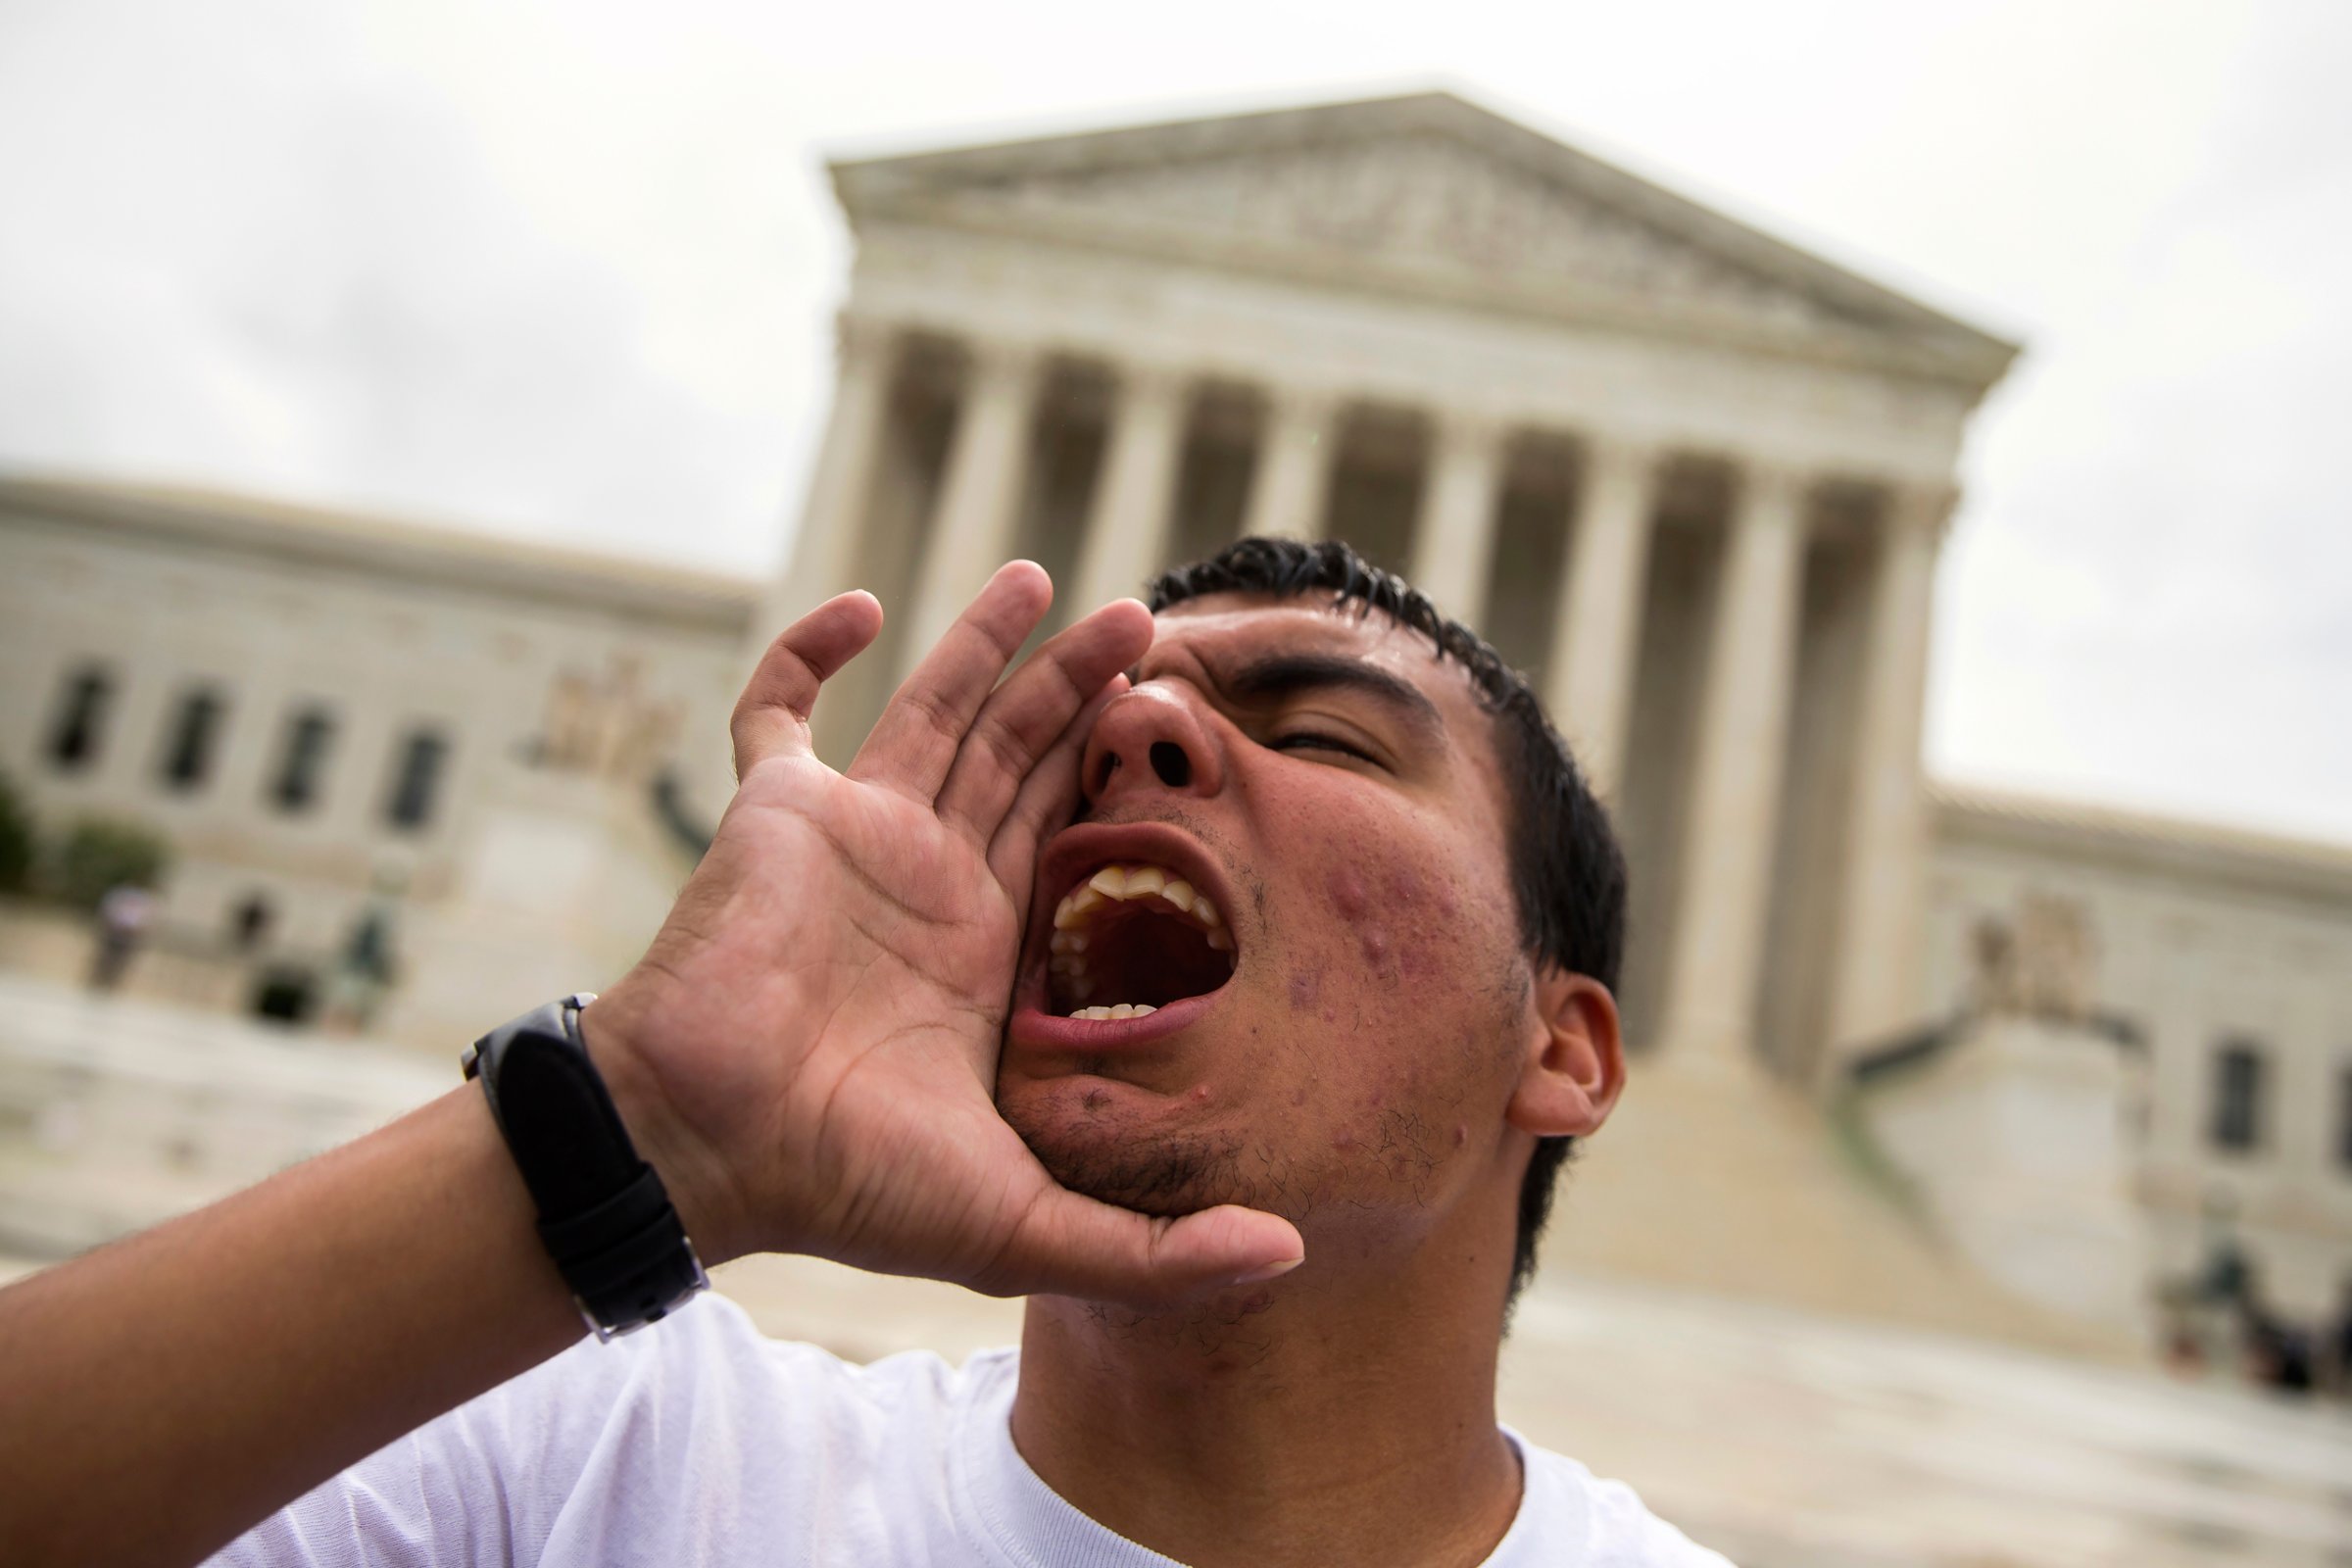 Gerson Quinteron of Washington, yells during a demonstration on immigration at the Supreme Court in Washington, Thursday, June 23, 2016. A tie vote by the Supreme Court is blocking President Barack Obama's immigration plan that sought to shield millions living in the U.S. illegally from deportation. The justices' one-sentence opinion effectively kills the plan for the duration of Obama's presidency. (AP Photo/Evan Vucci)